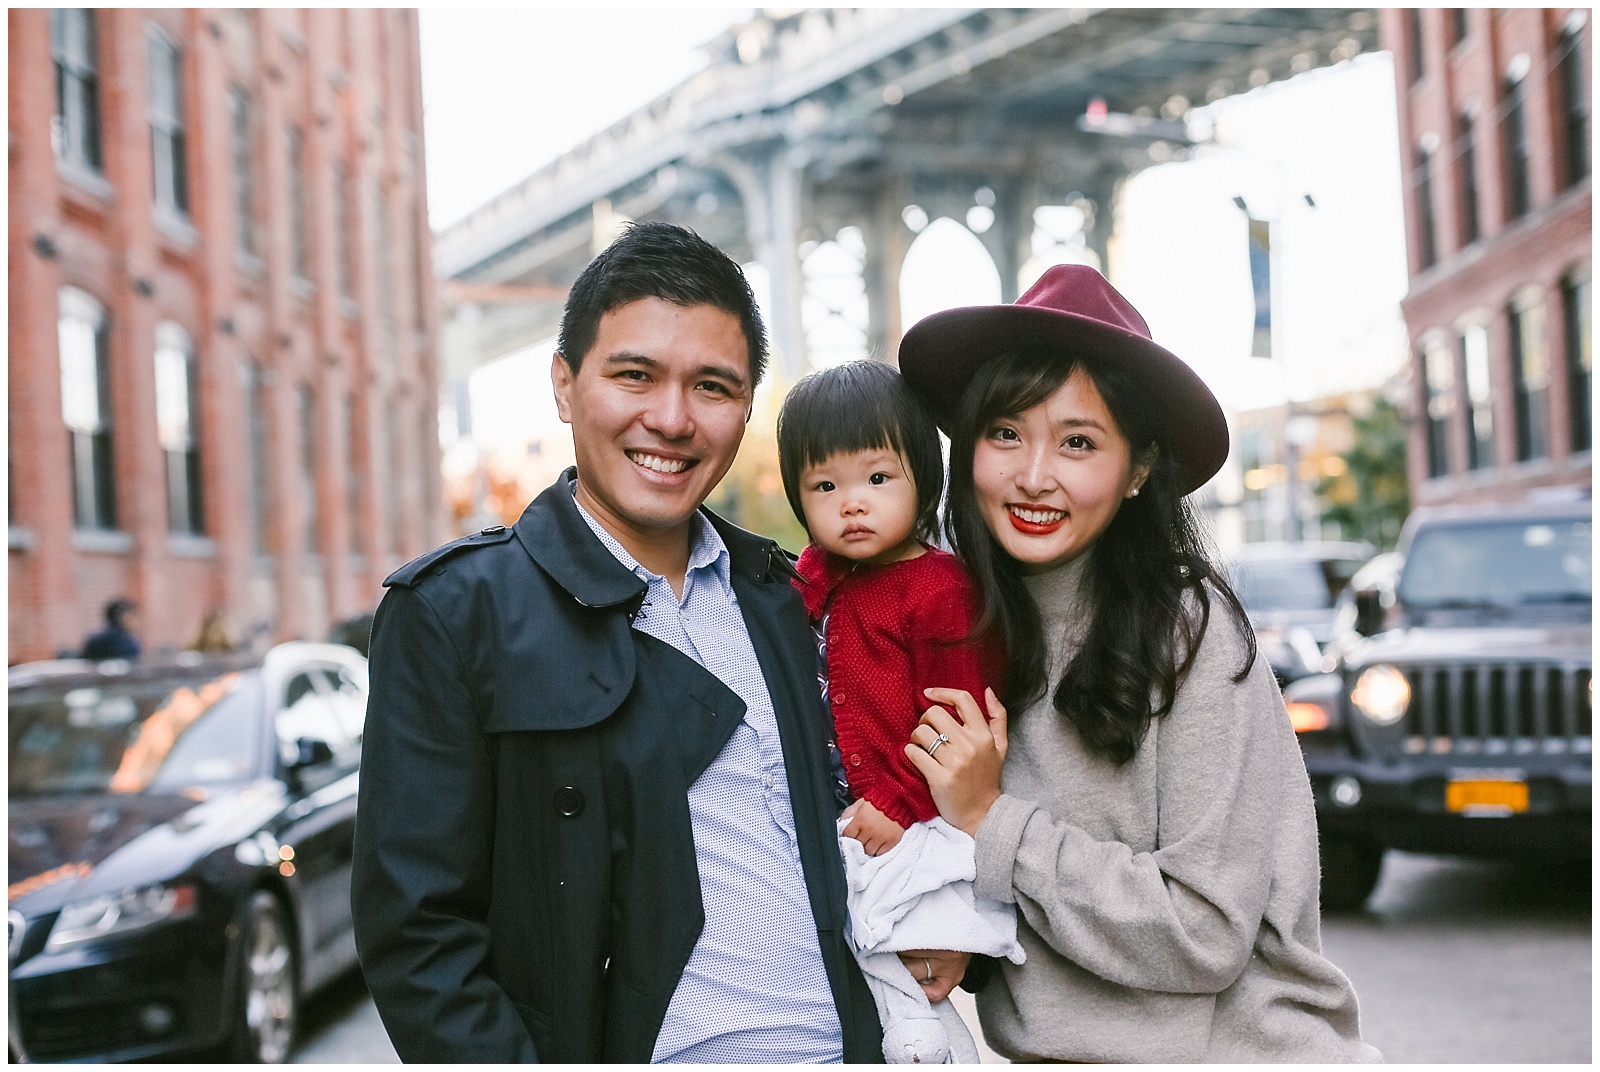 NYC family photographer photographs smiling asian family in DUMBO Brooklyn